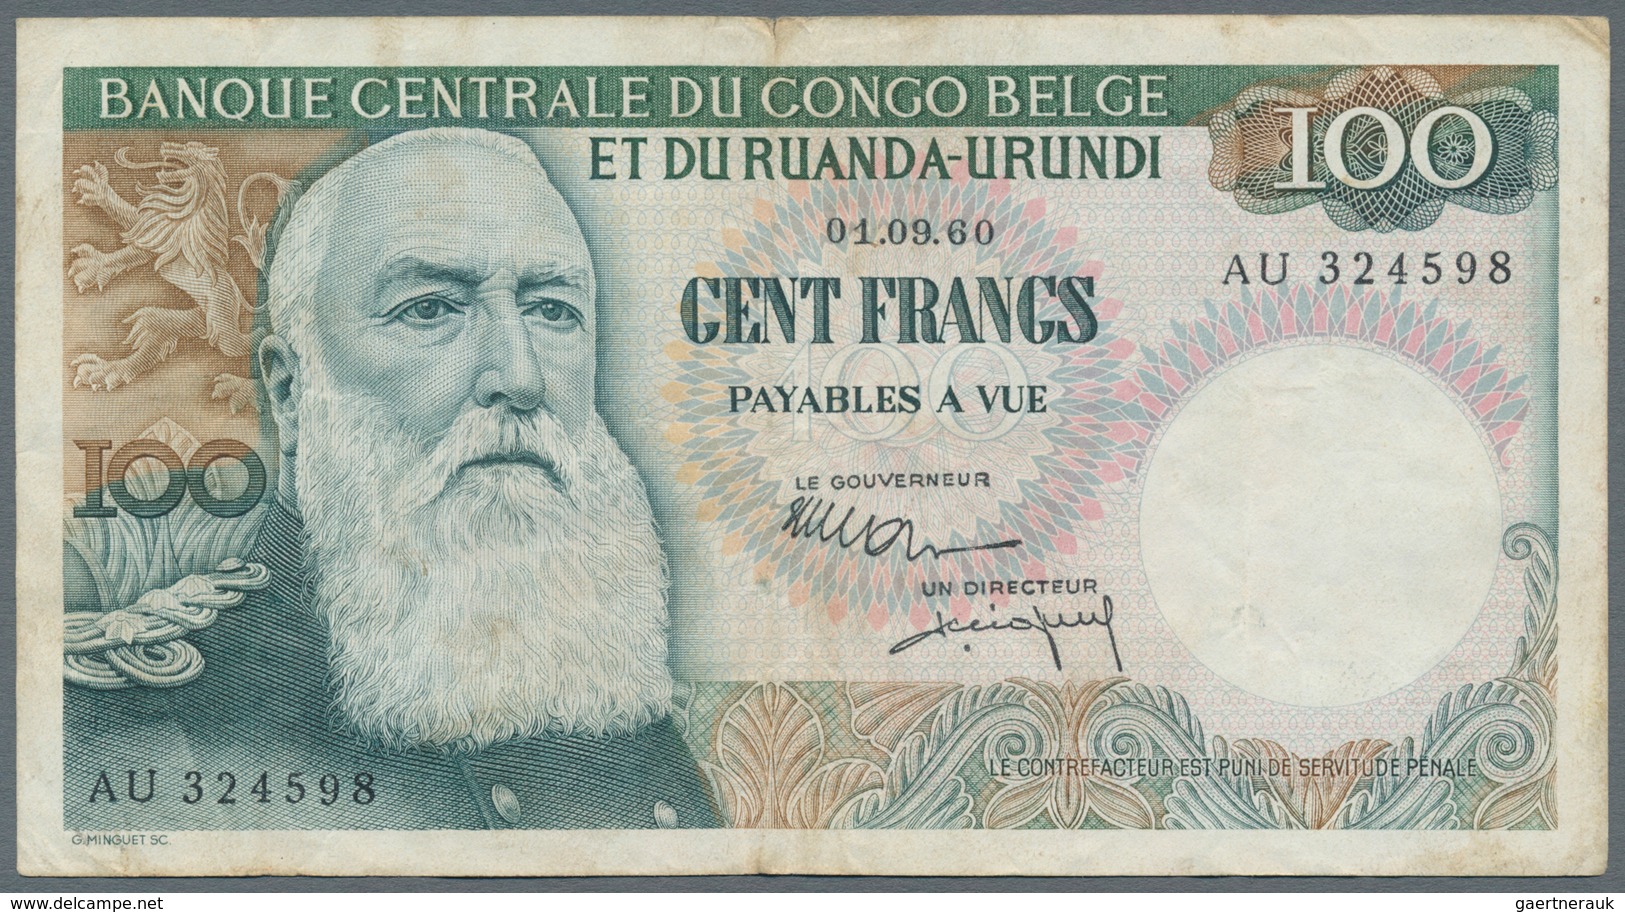 Belgian Congo / Belgisch Kongo: Very nice set with with 7 banknotes comprising 5 Francs 1947, 10 Fra